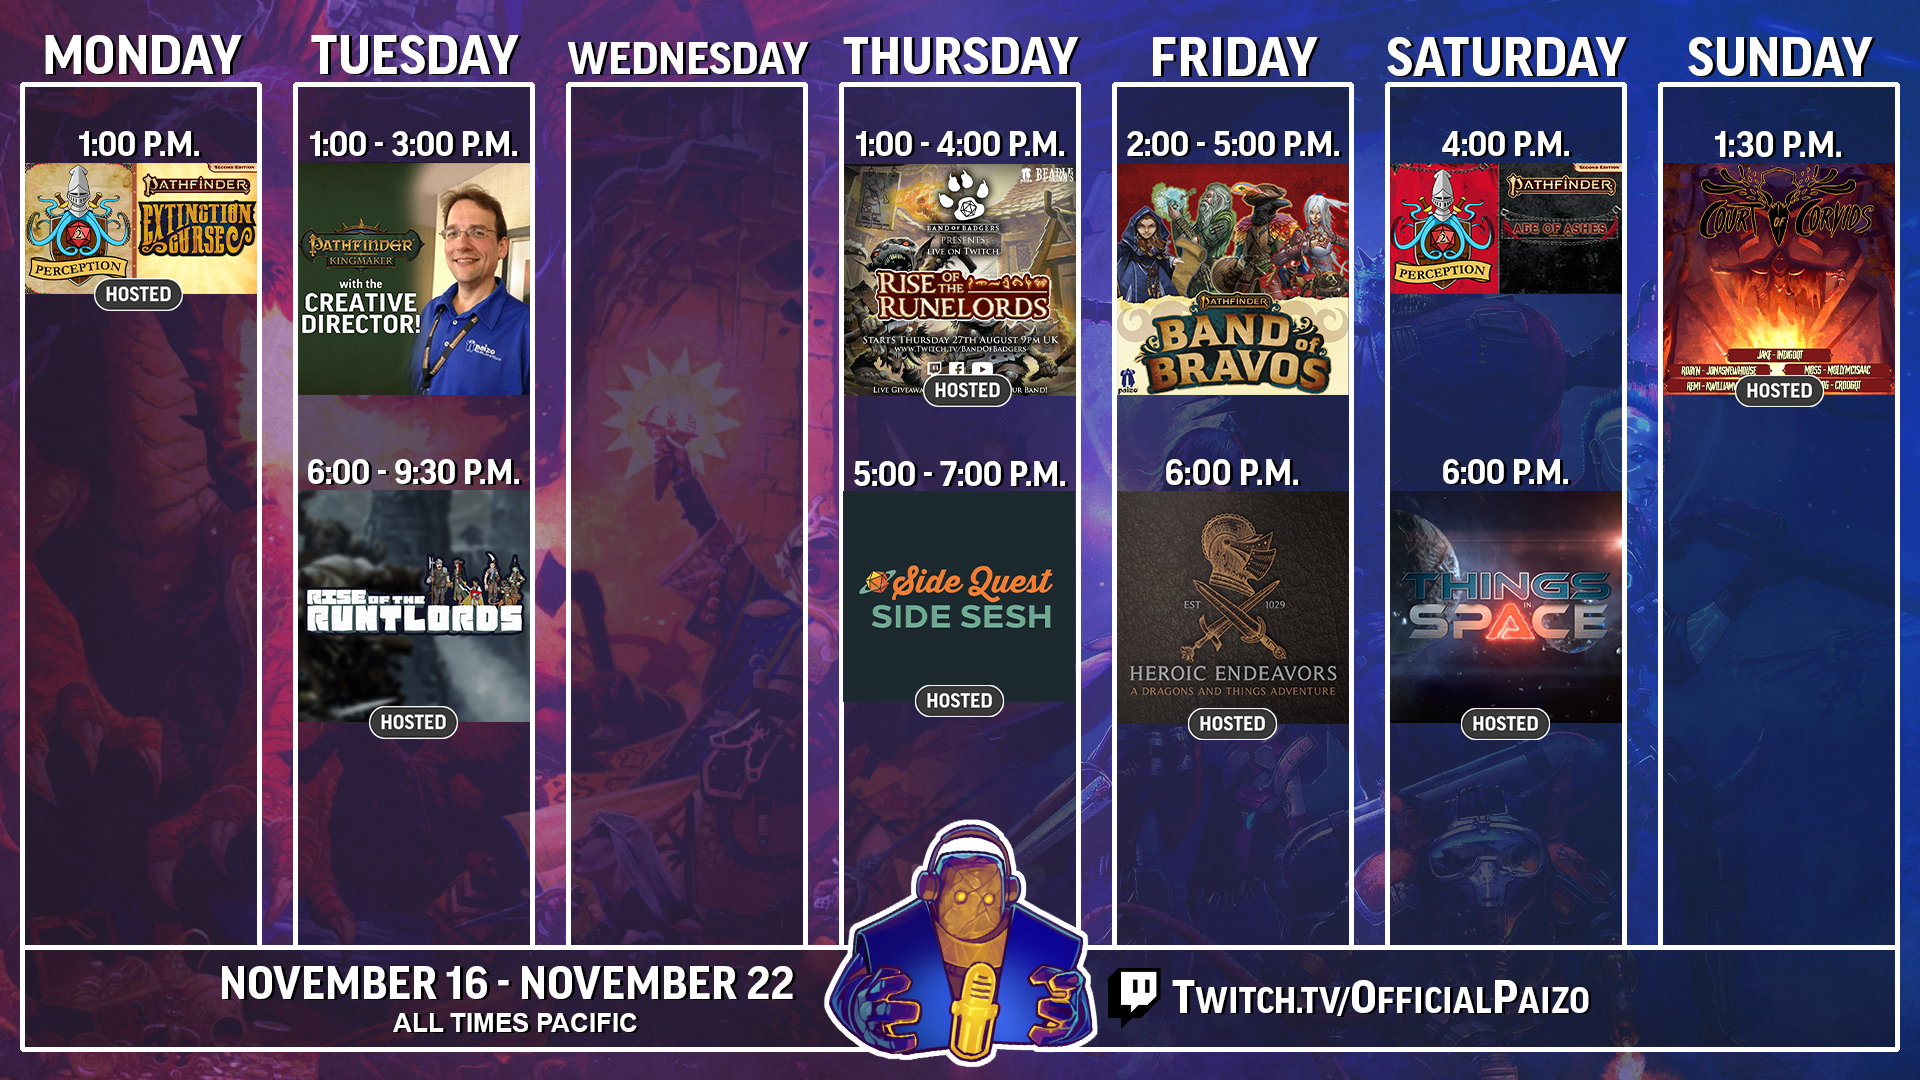 Official Paizo twitch streaming schedule for November 16th to the 22nd